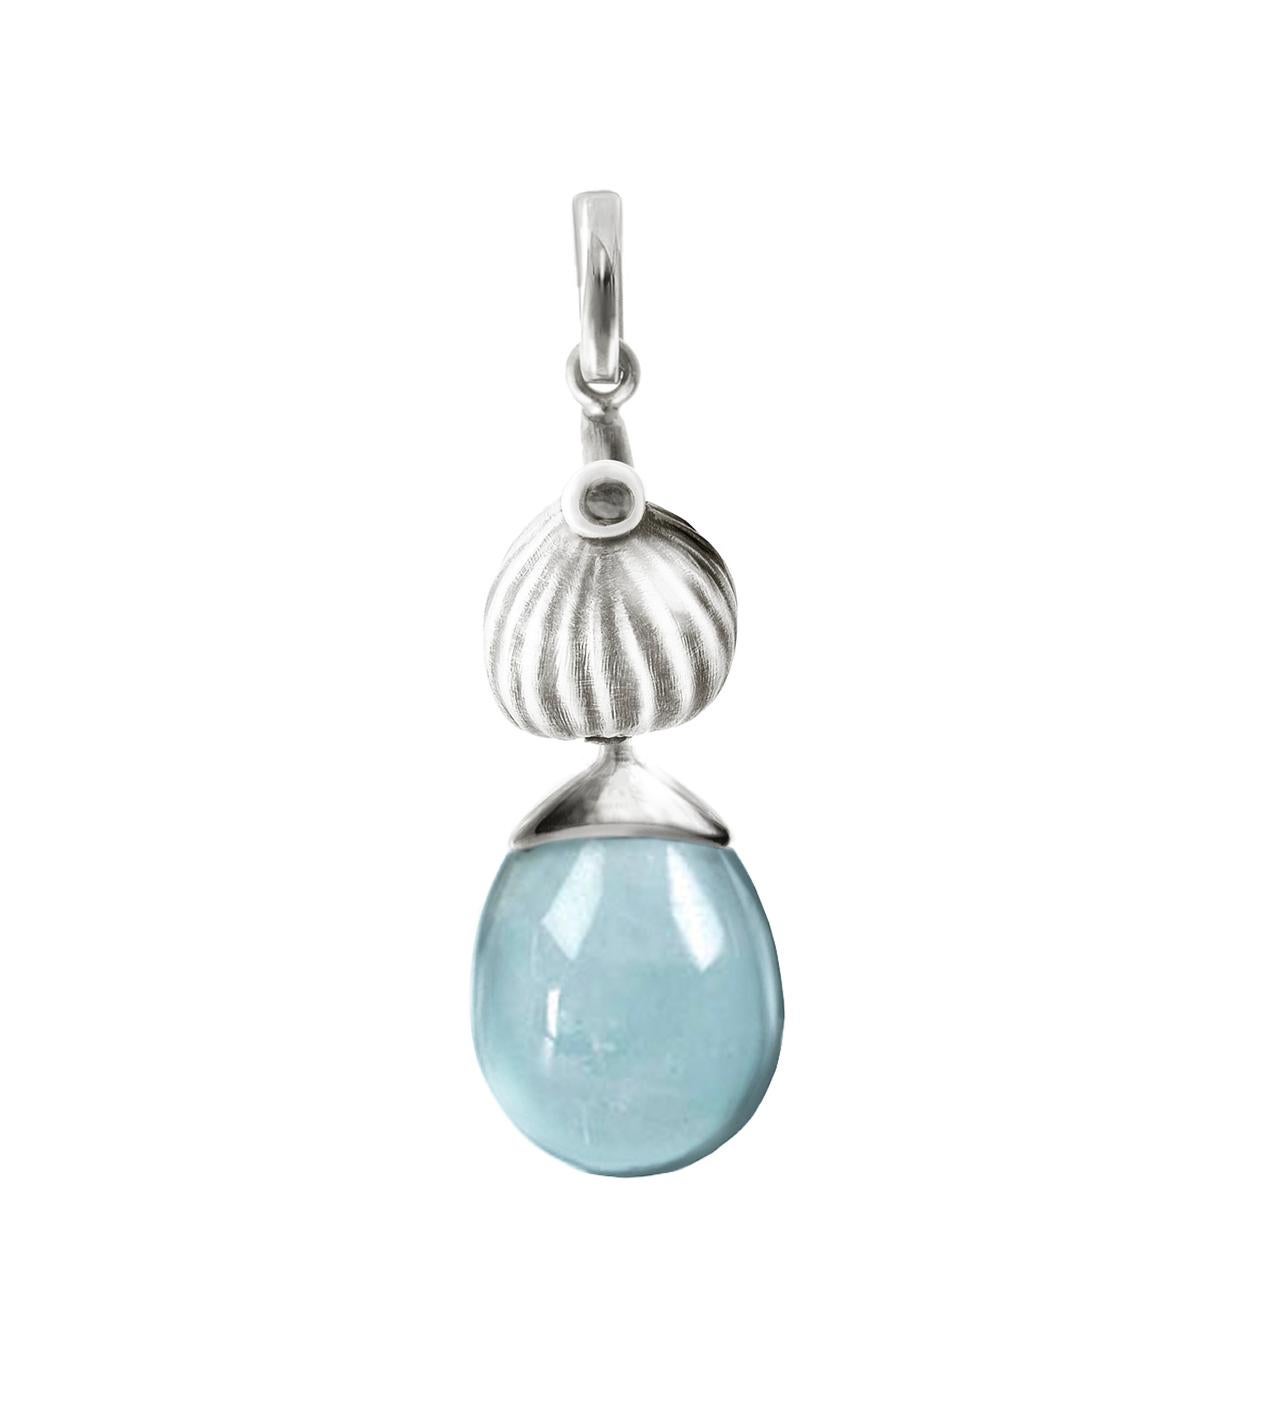 This pendant necklace features a drop with natural topaz cabochon and is made of sterling silver. The gemstone drop is open to the light, making it sparkle. This collection was featured in Vogue Ukraine.

The idea for this collection came from the